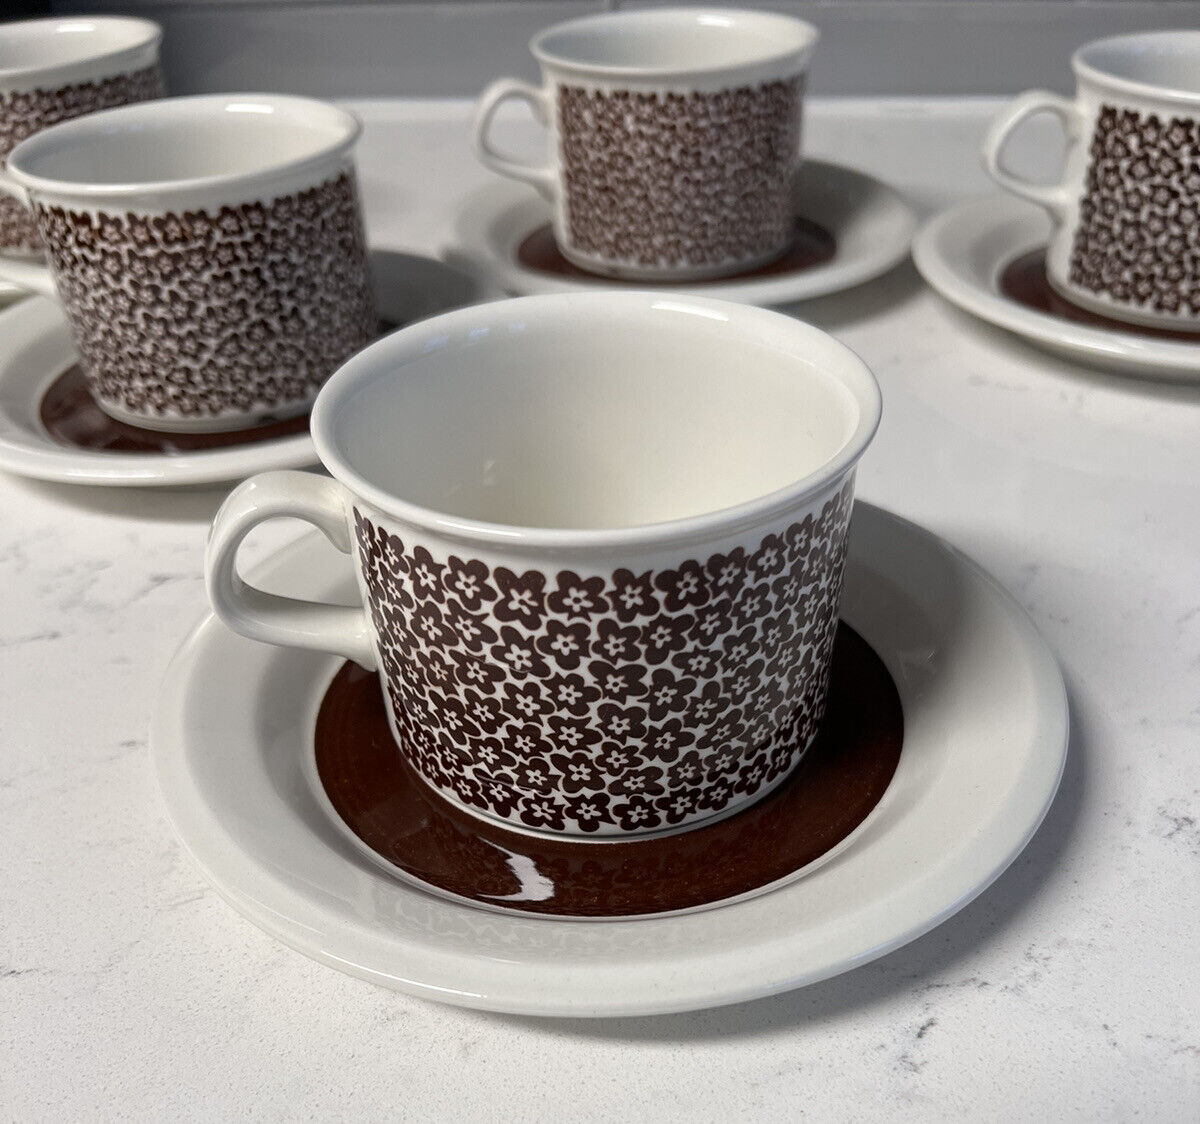 Read more about the article Arabia Faenza Finland Ruskeakukka Inkeri Leivo Brown Flower Cups And Saucers (5)